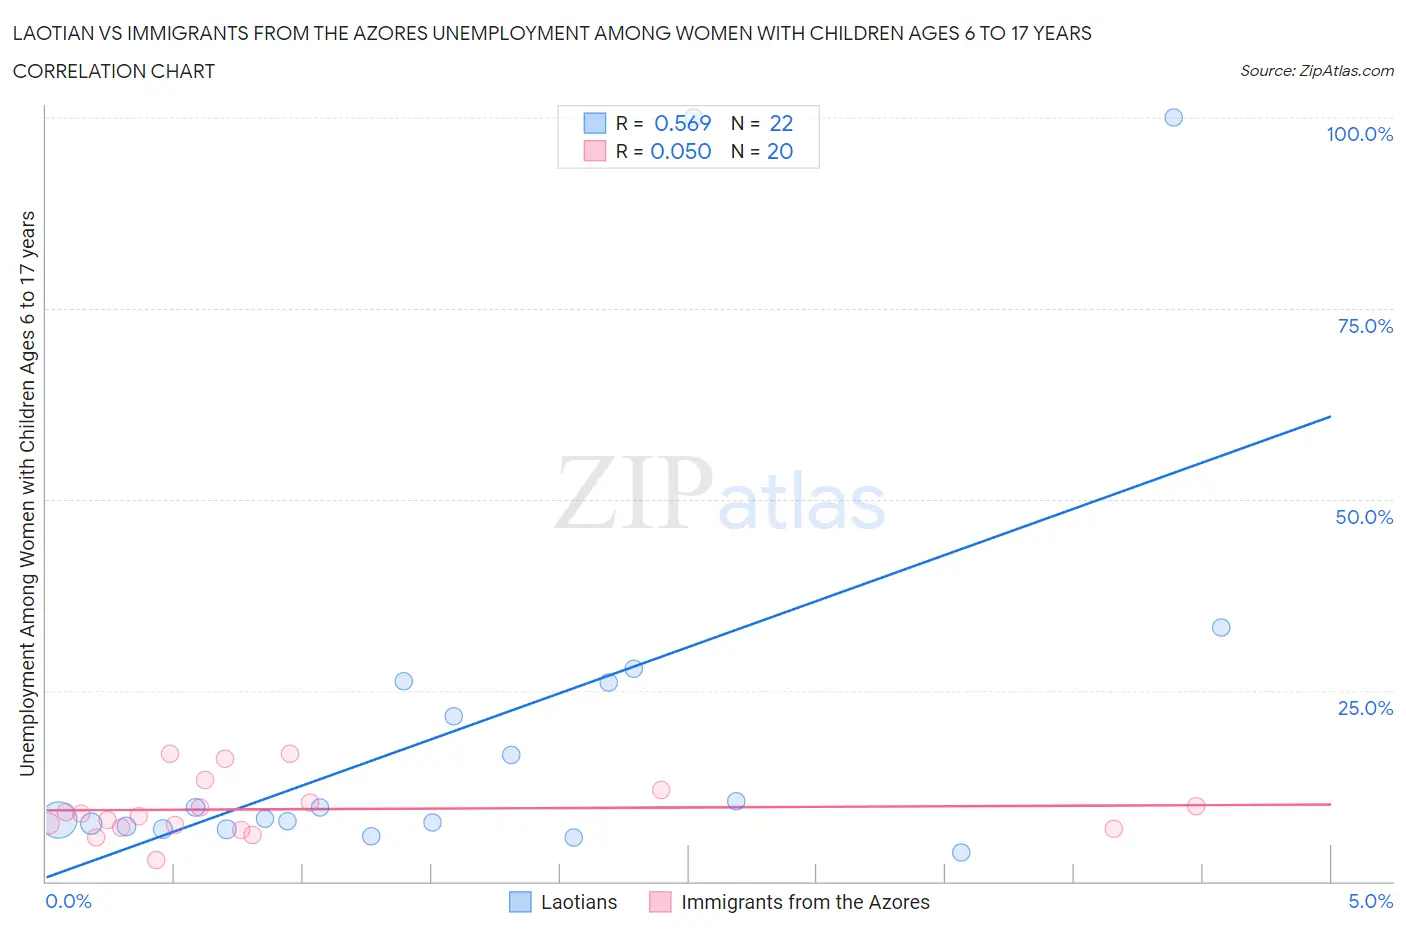 Laotian vs Immigrants from the Azores Unemployment Among Women with Children Ages 6 to 17 years